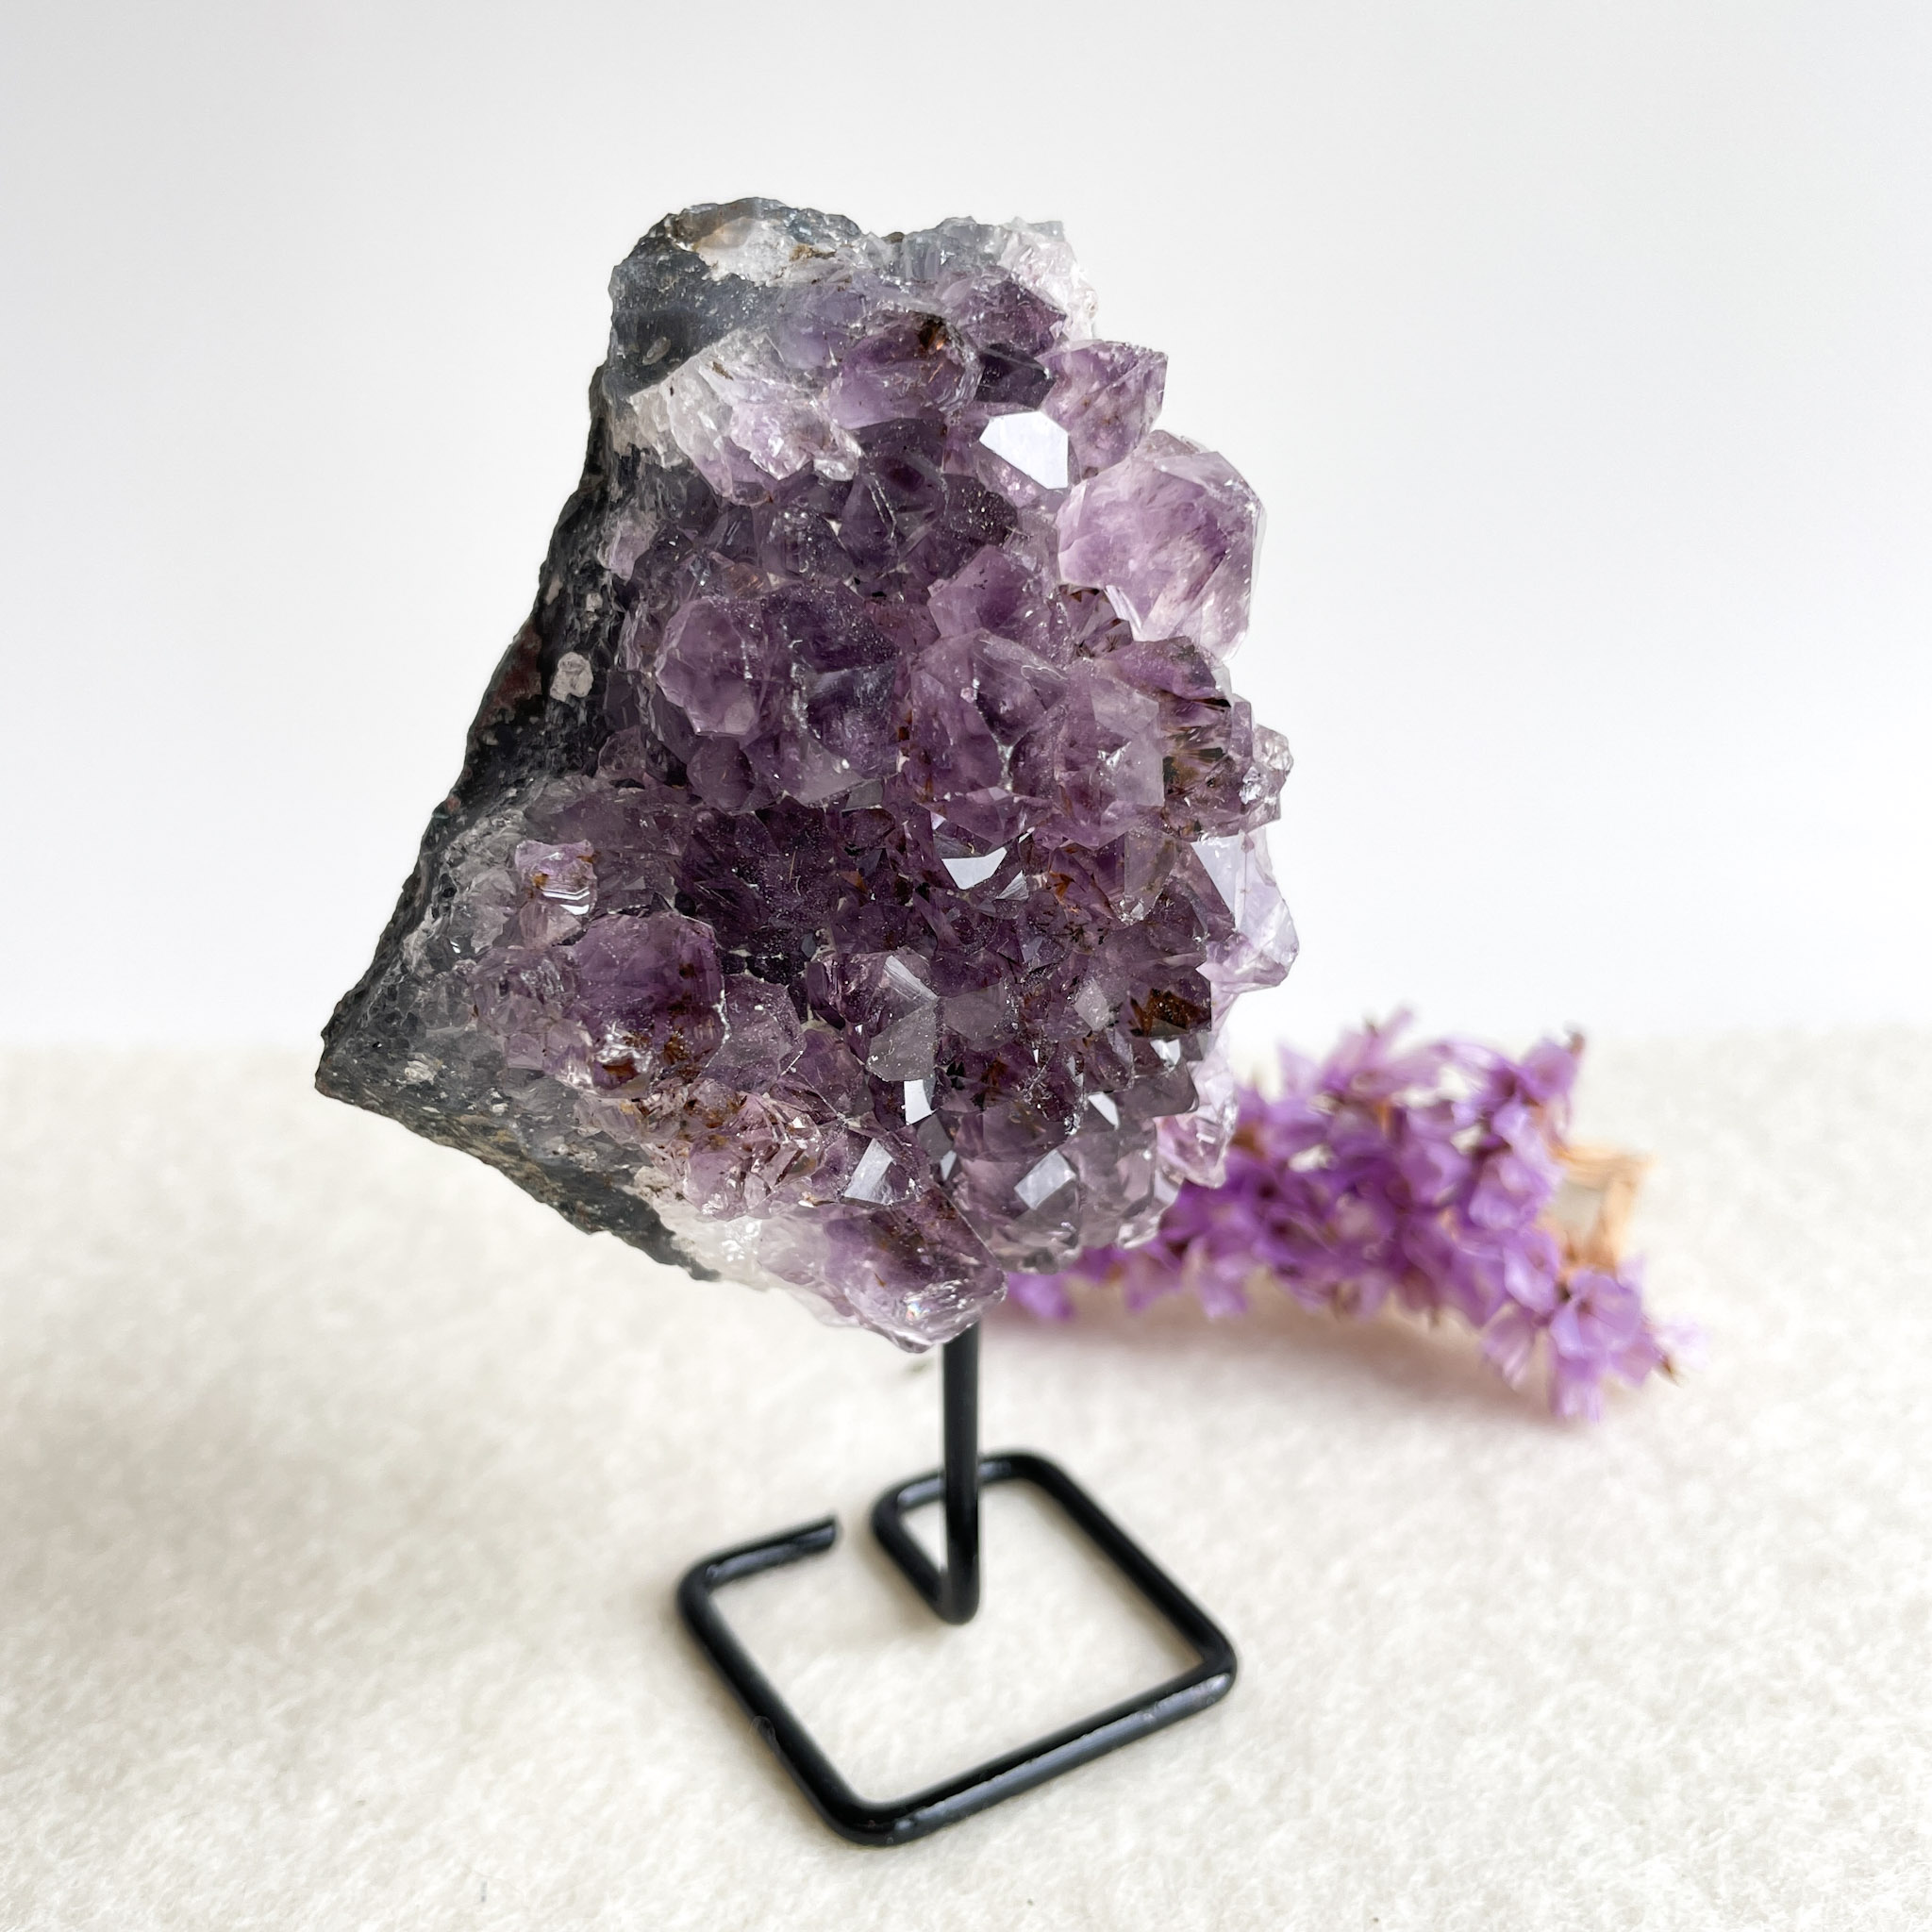 A close-up of an amethyst crystal cluster mounted on a black metal stand, with a small purple flower placed to its side, displayed against a soft white background.